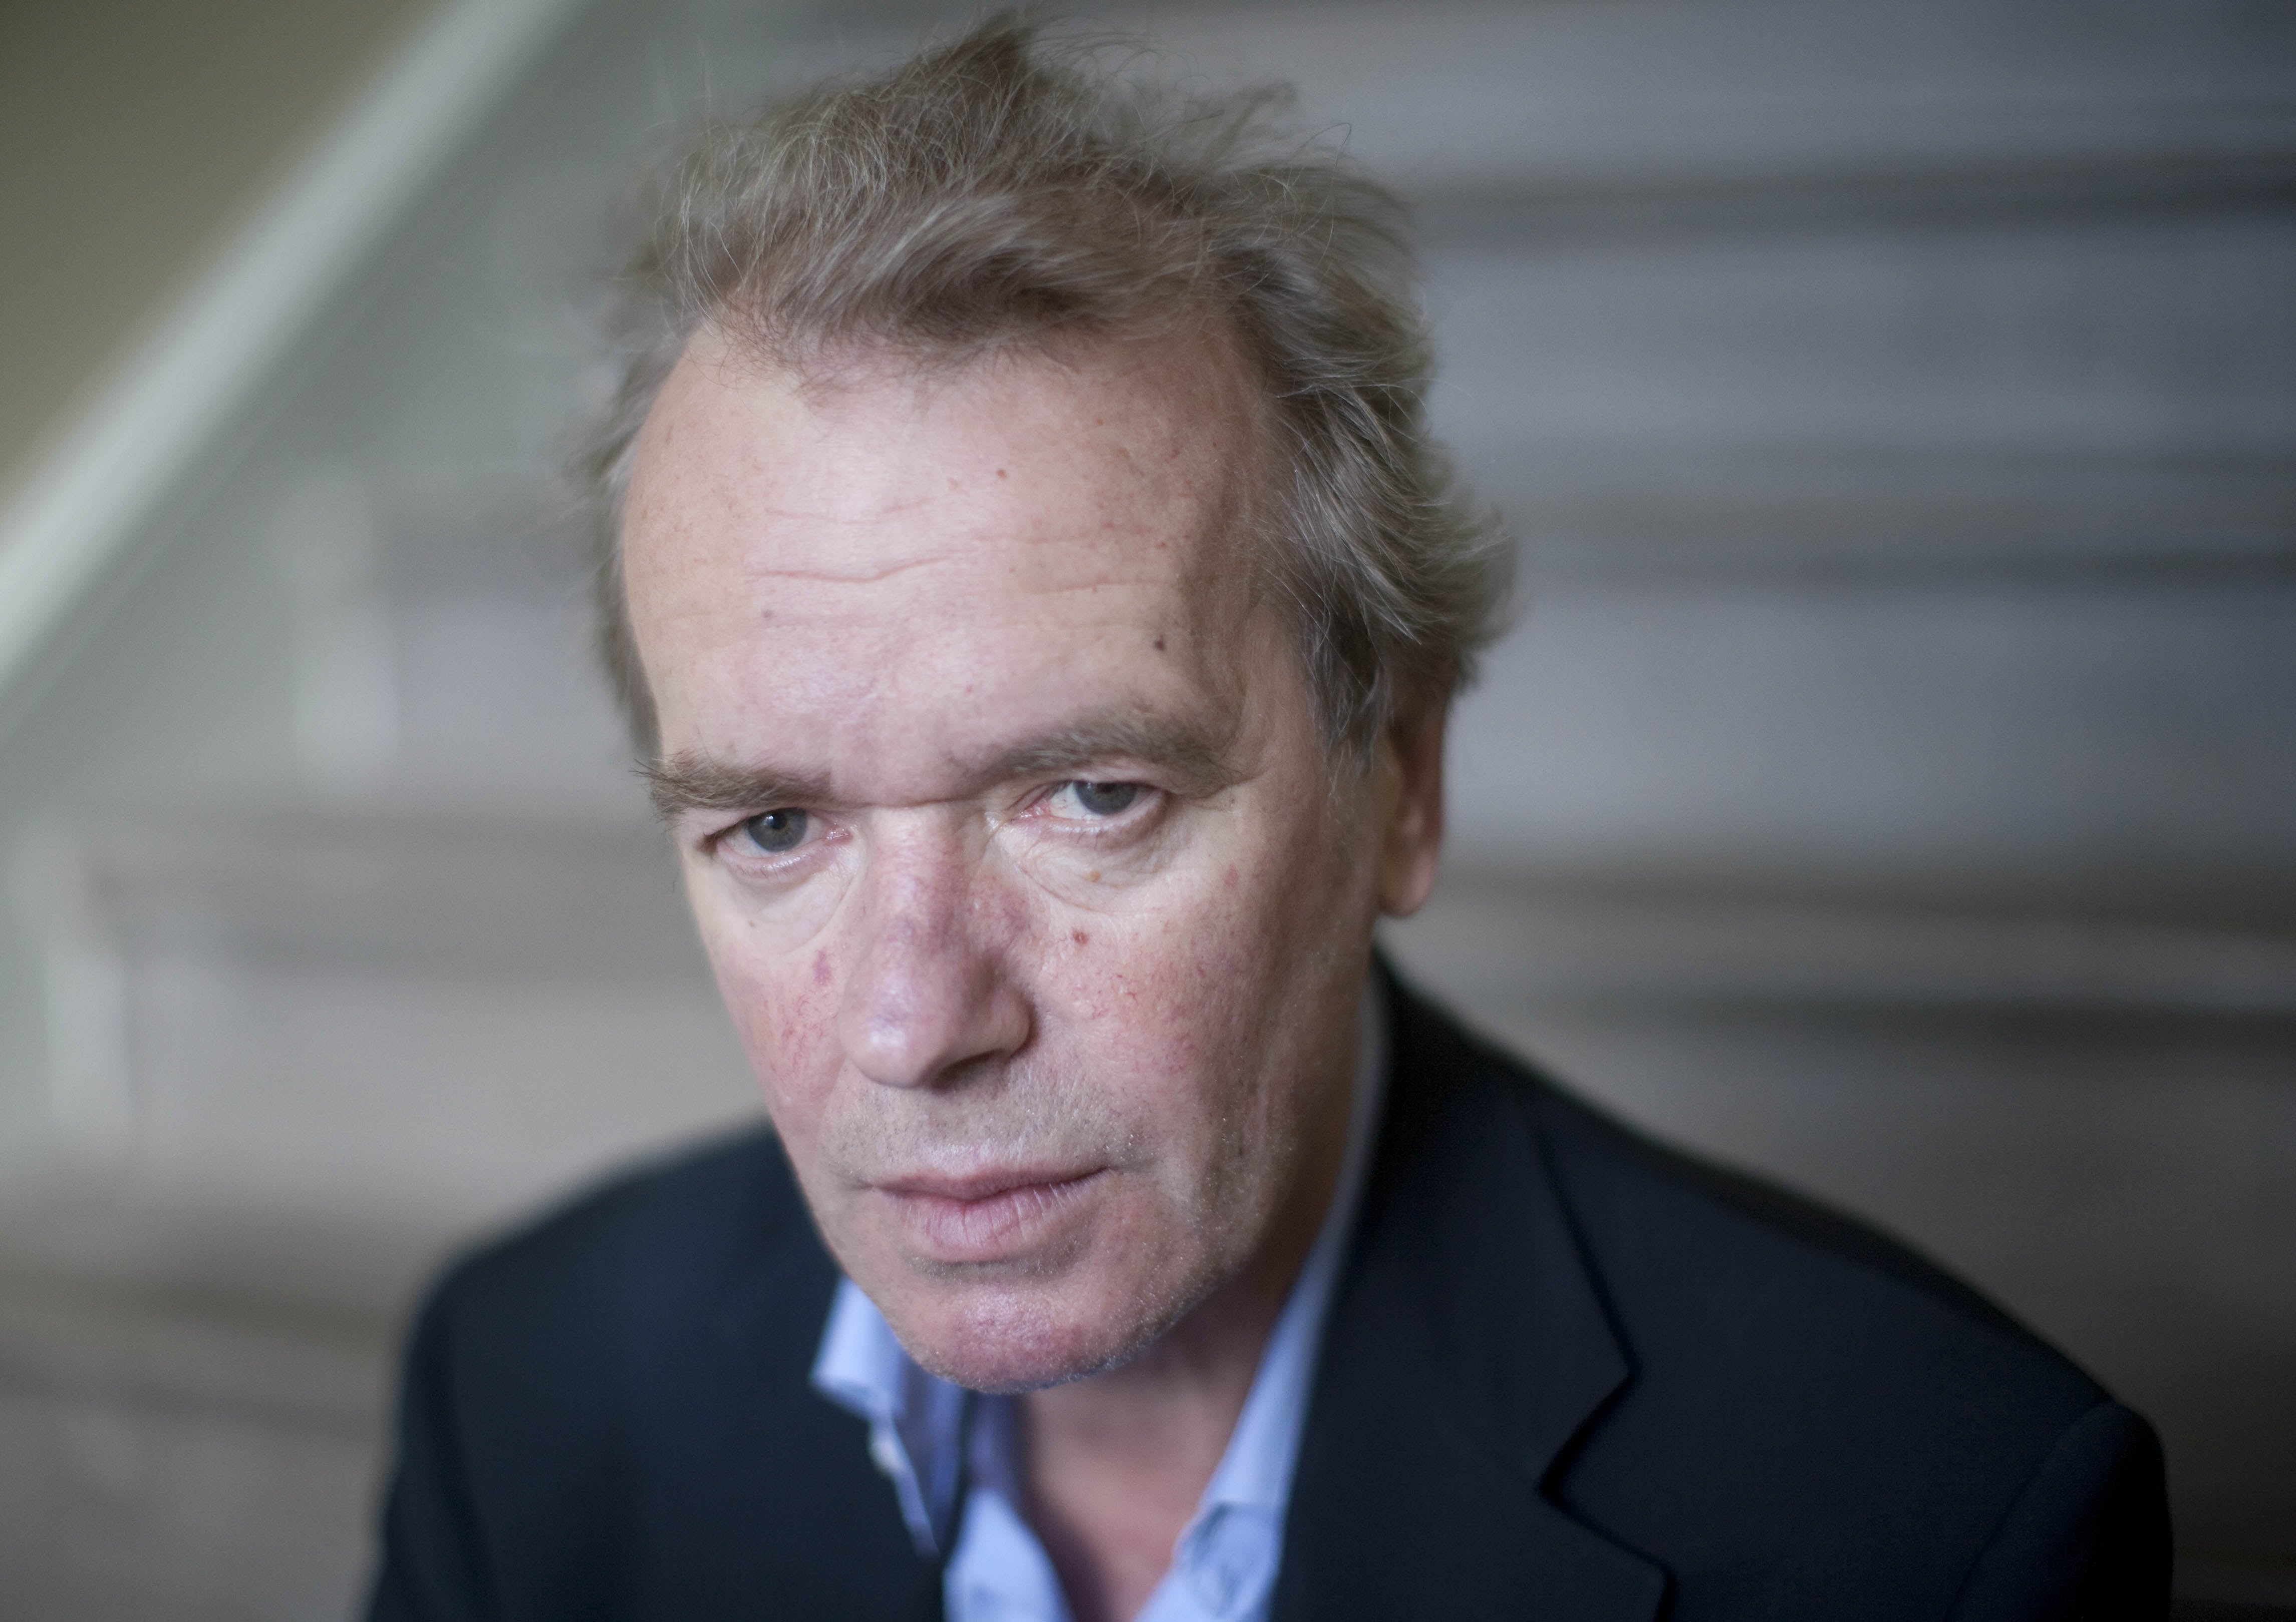 Martin Amis, who died last year, in 2010